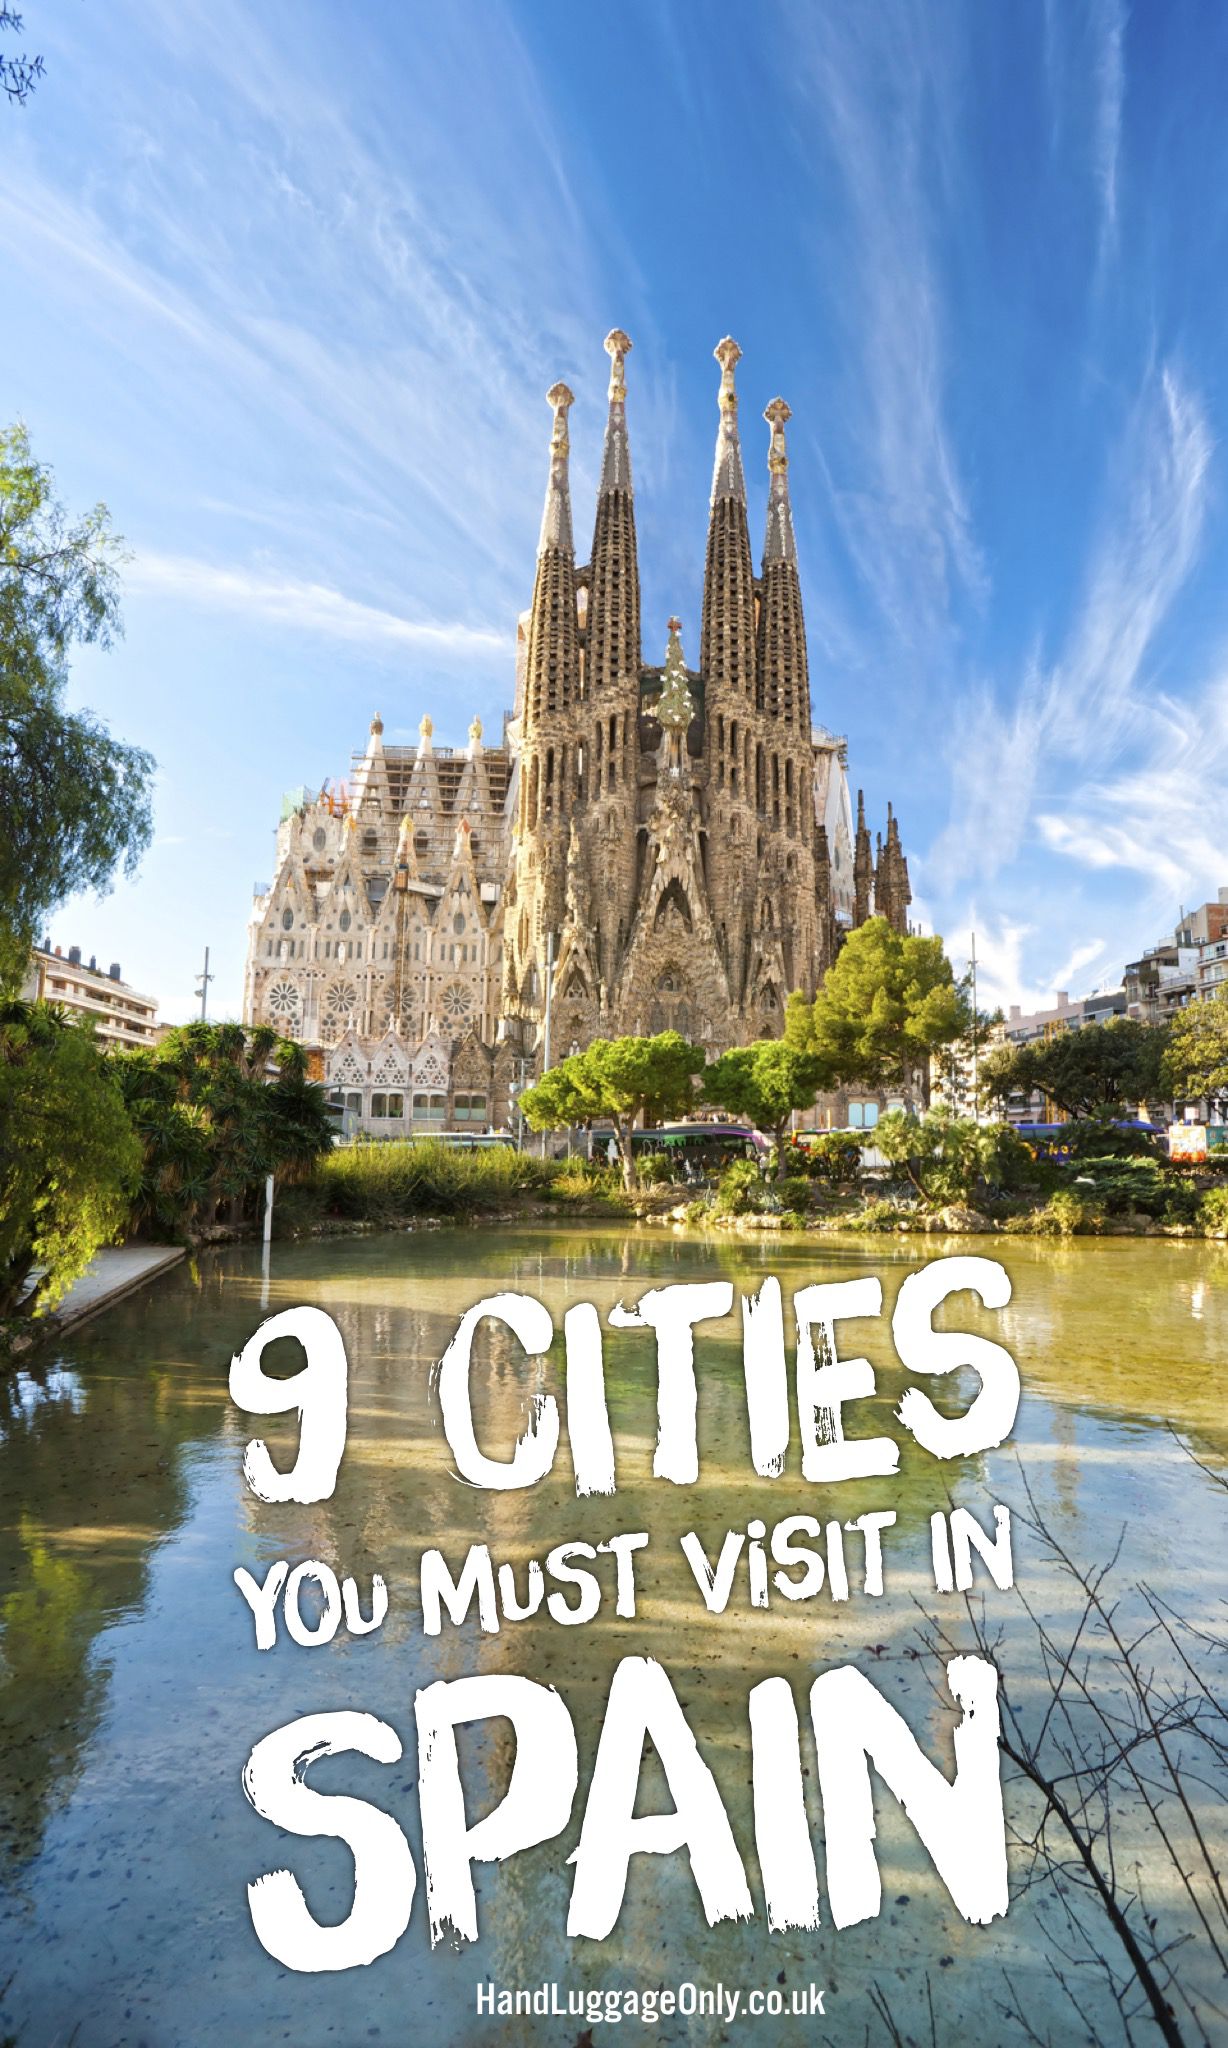 9 Cities You Must Visit In Spain! - Hand Luggage Only - Travel, Food & Photography Blog